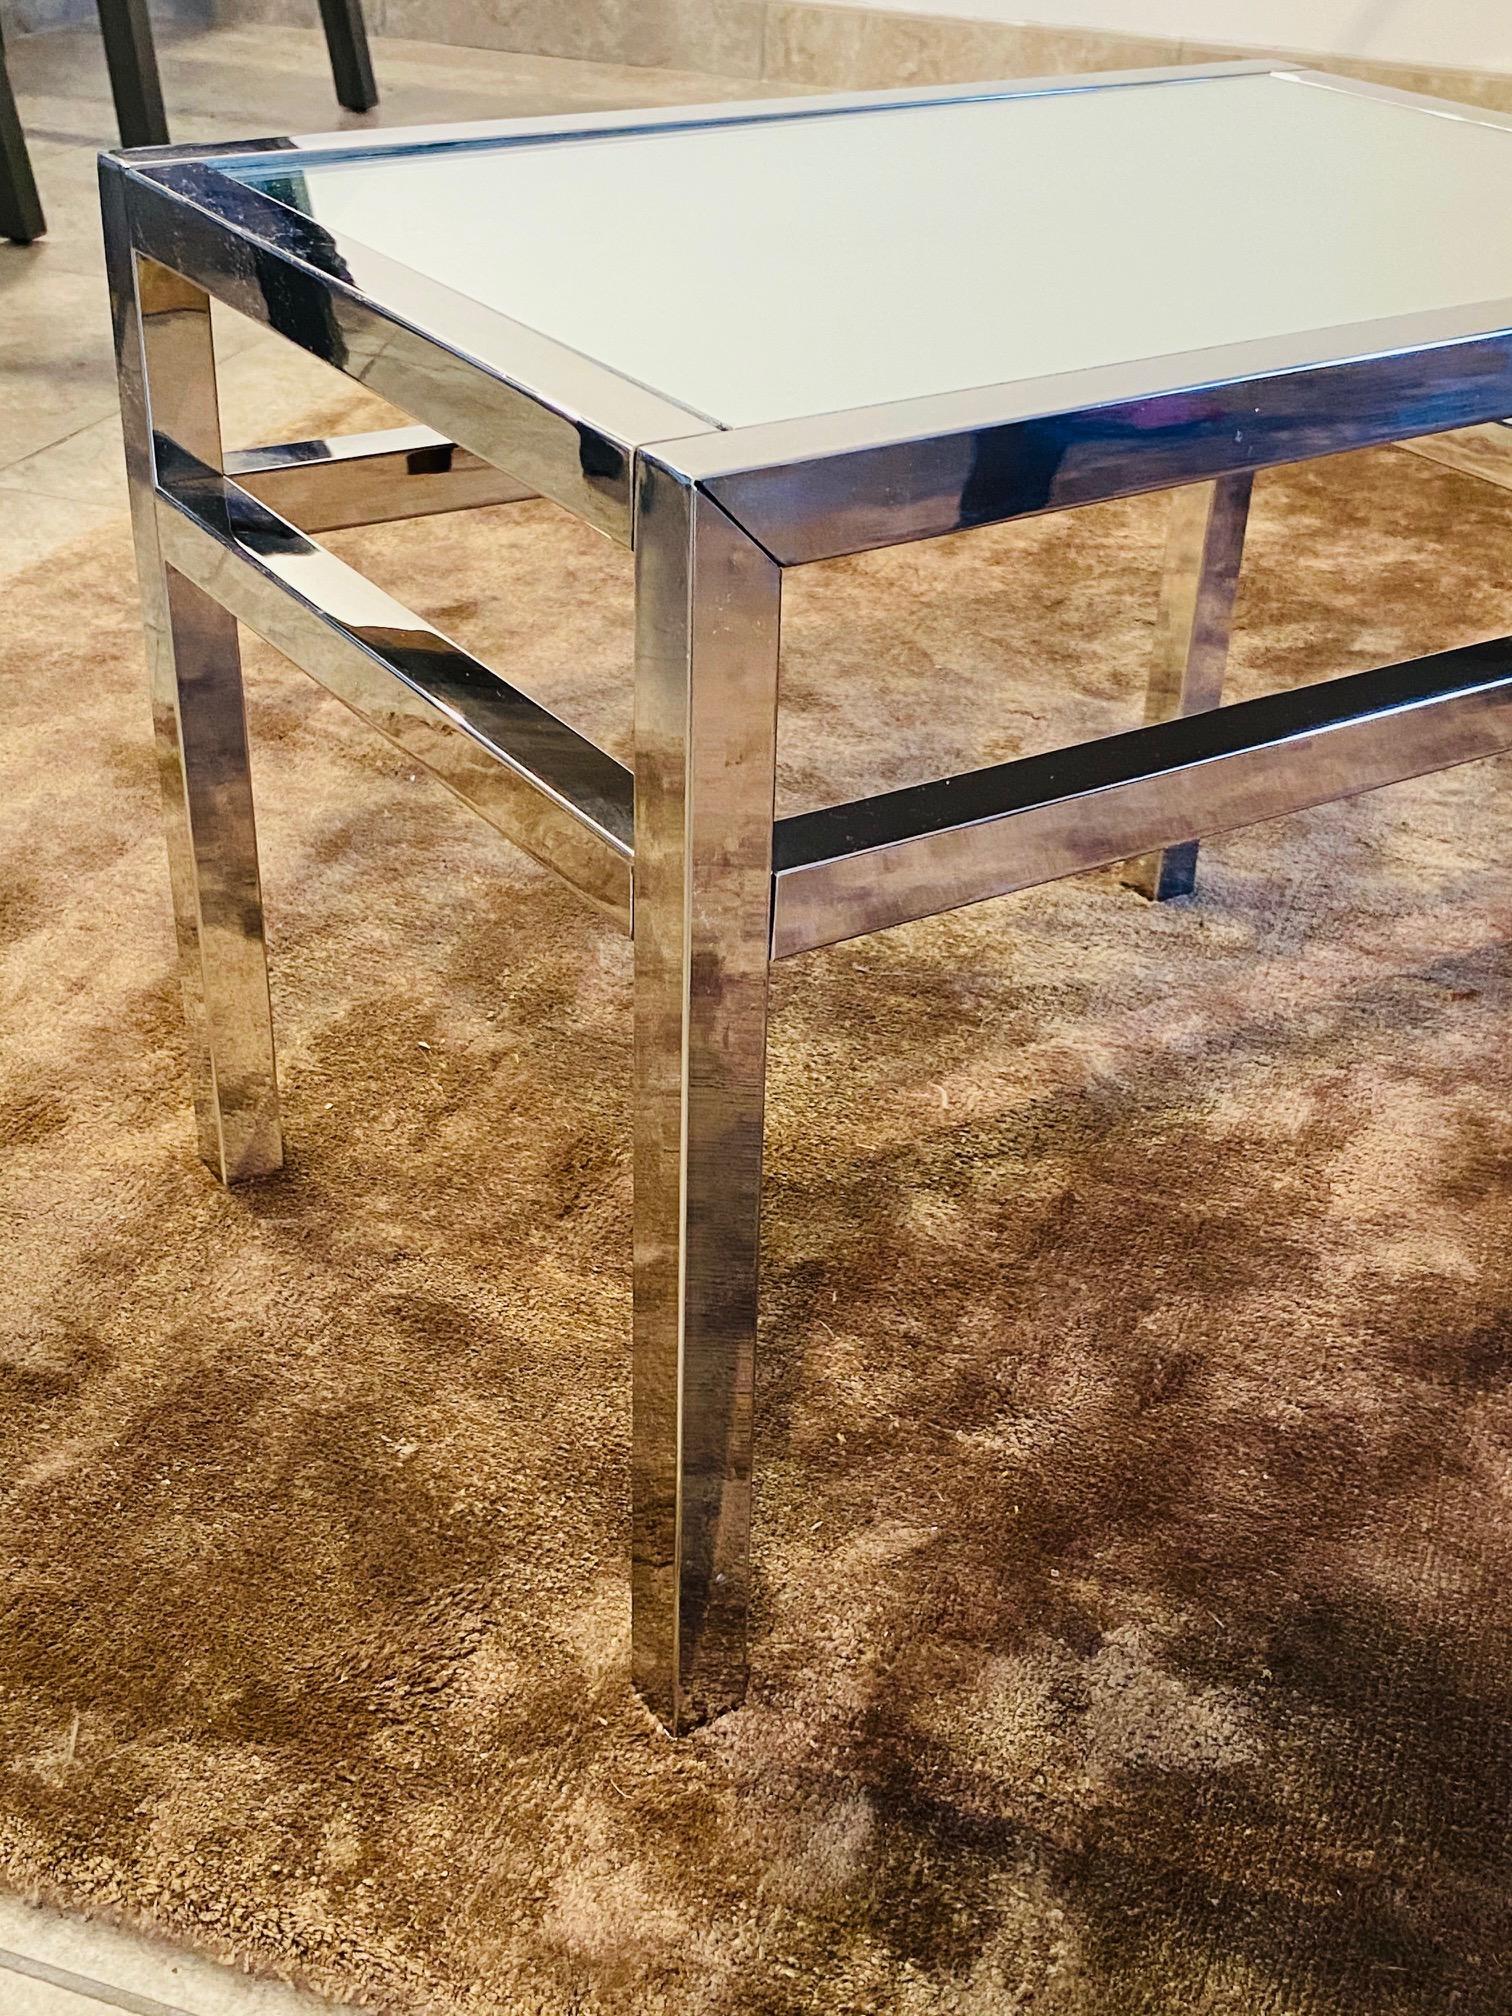 Pair of Chrome and Mirrored Side Tables in the style of Milo Baughman, c. 1970's For Sale 5